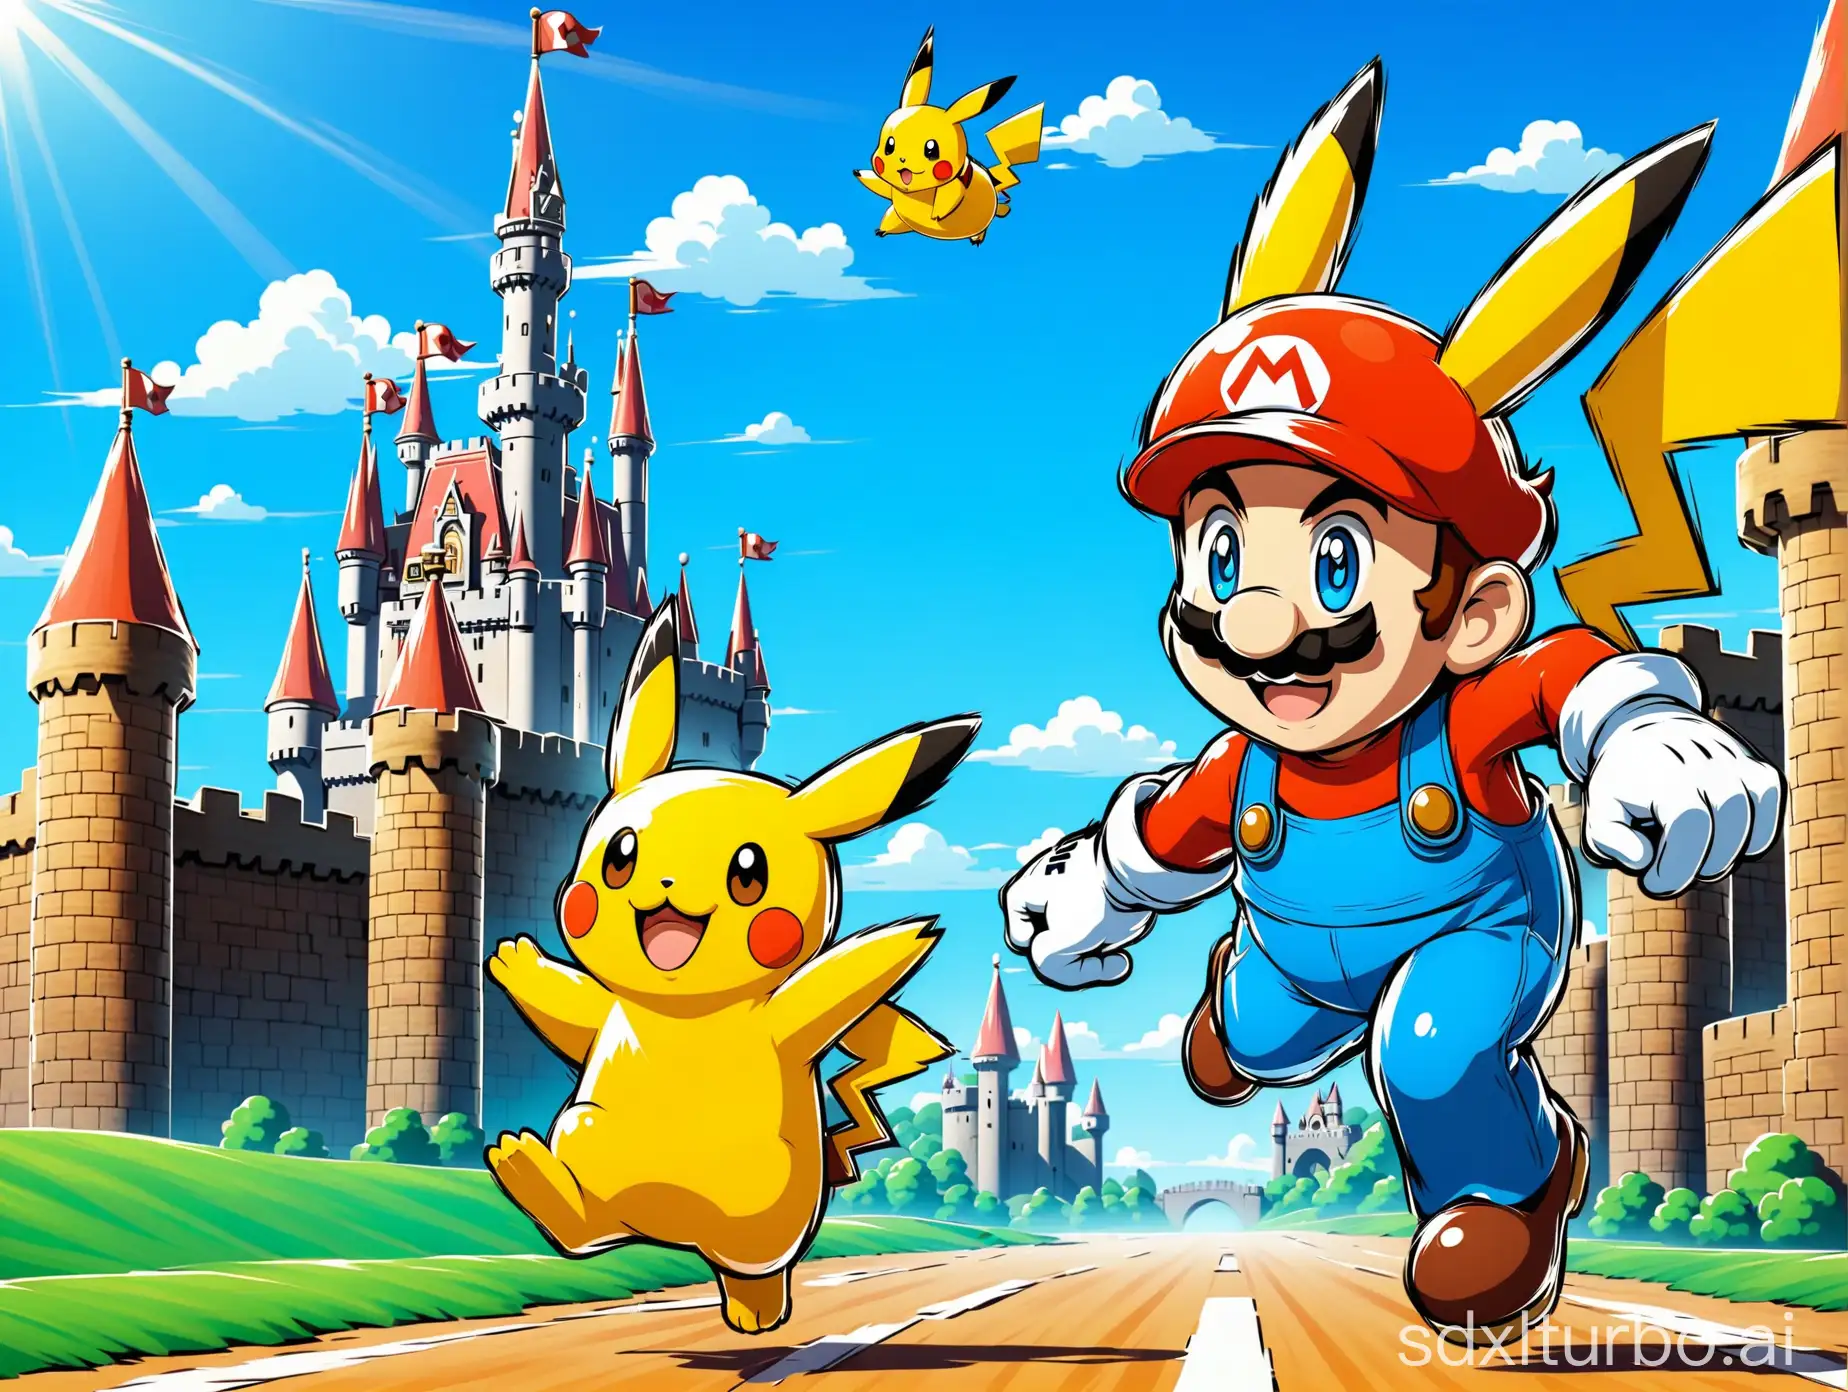 Super mario is running with Pikachu to the castle to save the princess, blue sky